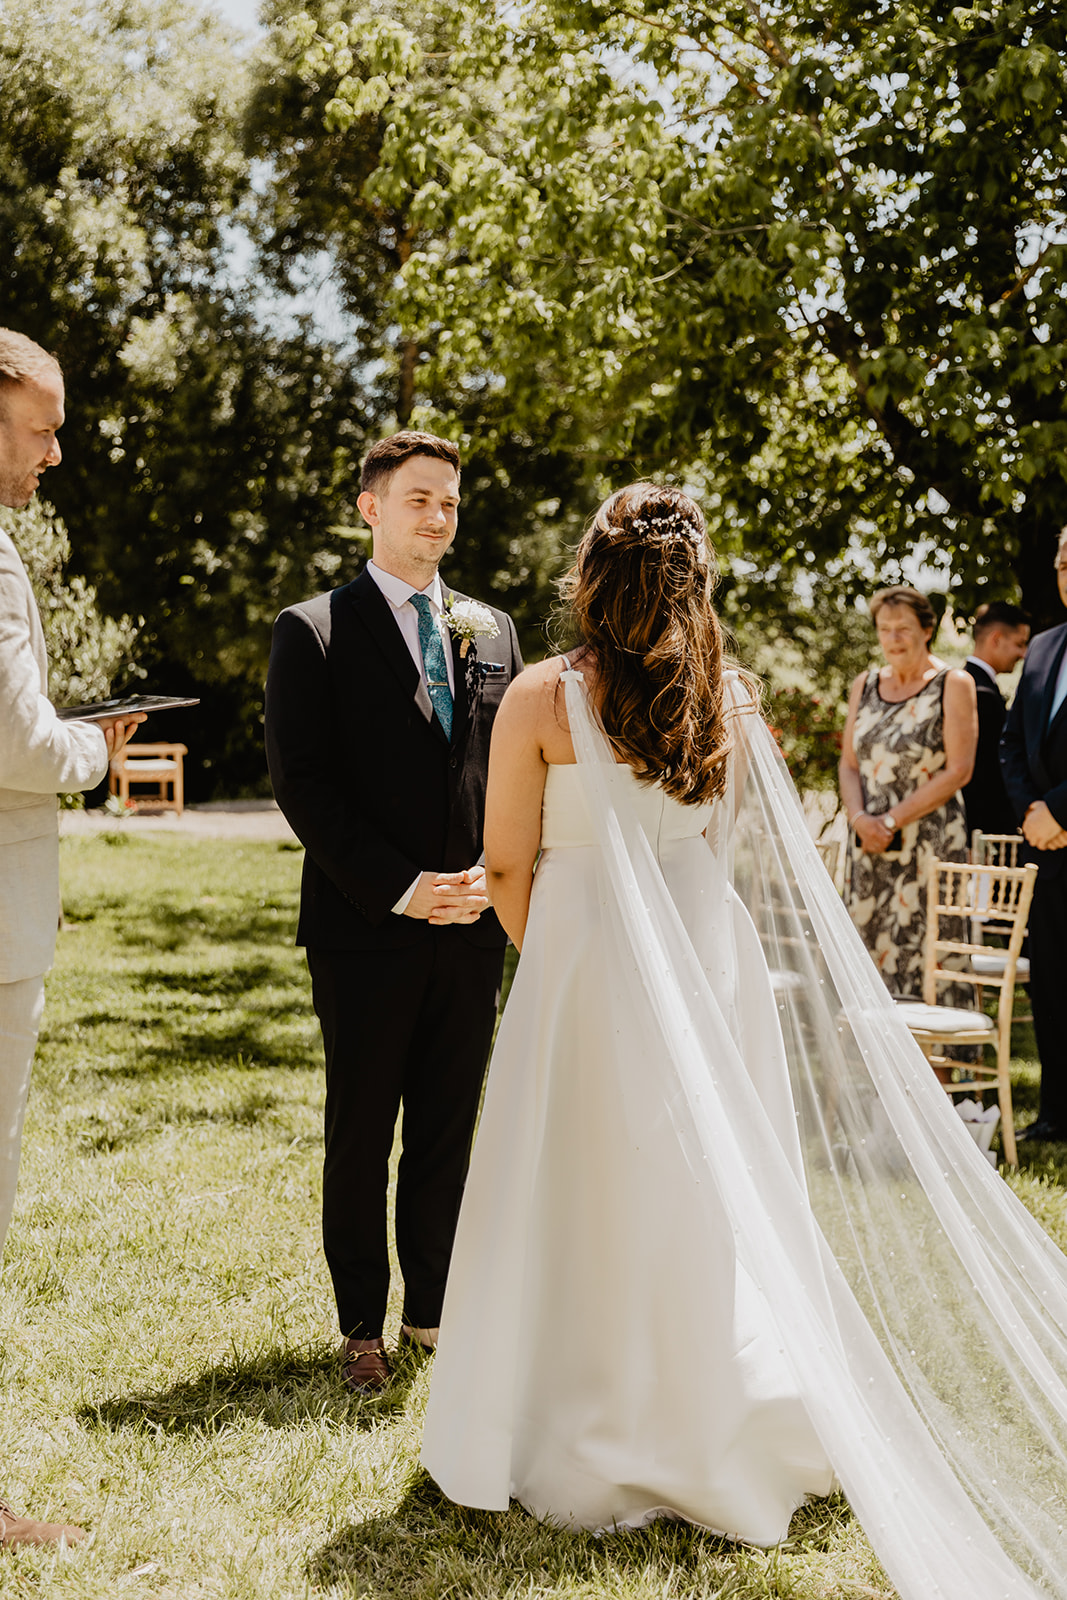 Bride and Groom at the alter at a Destination Wedding in France. Photography & Videography by OliveJoy Photography